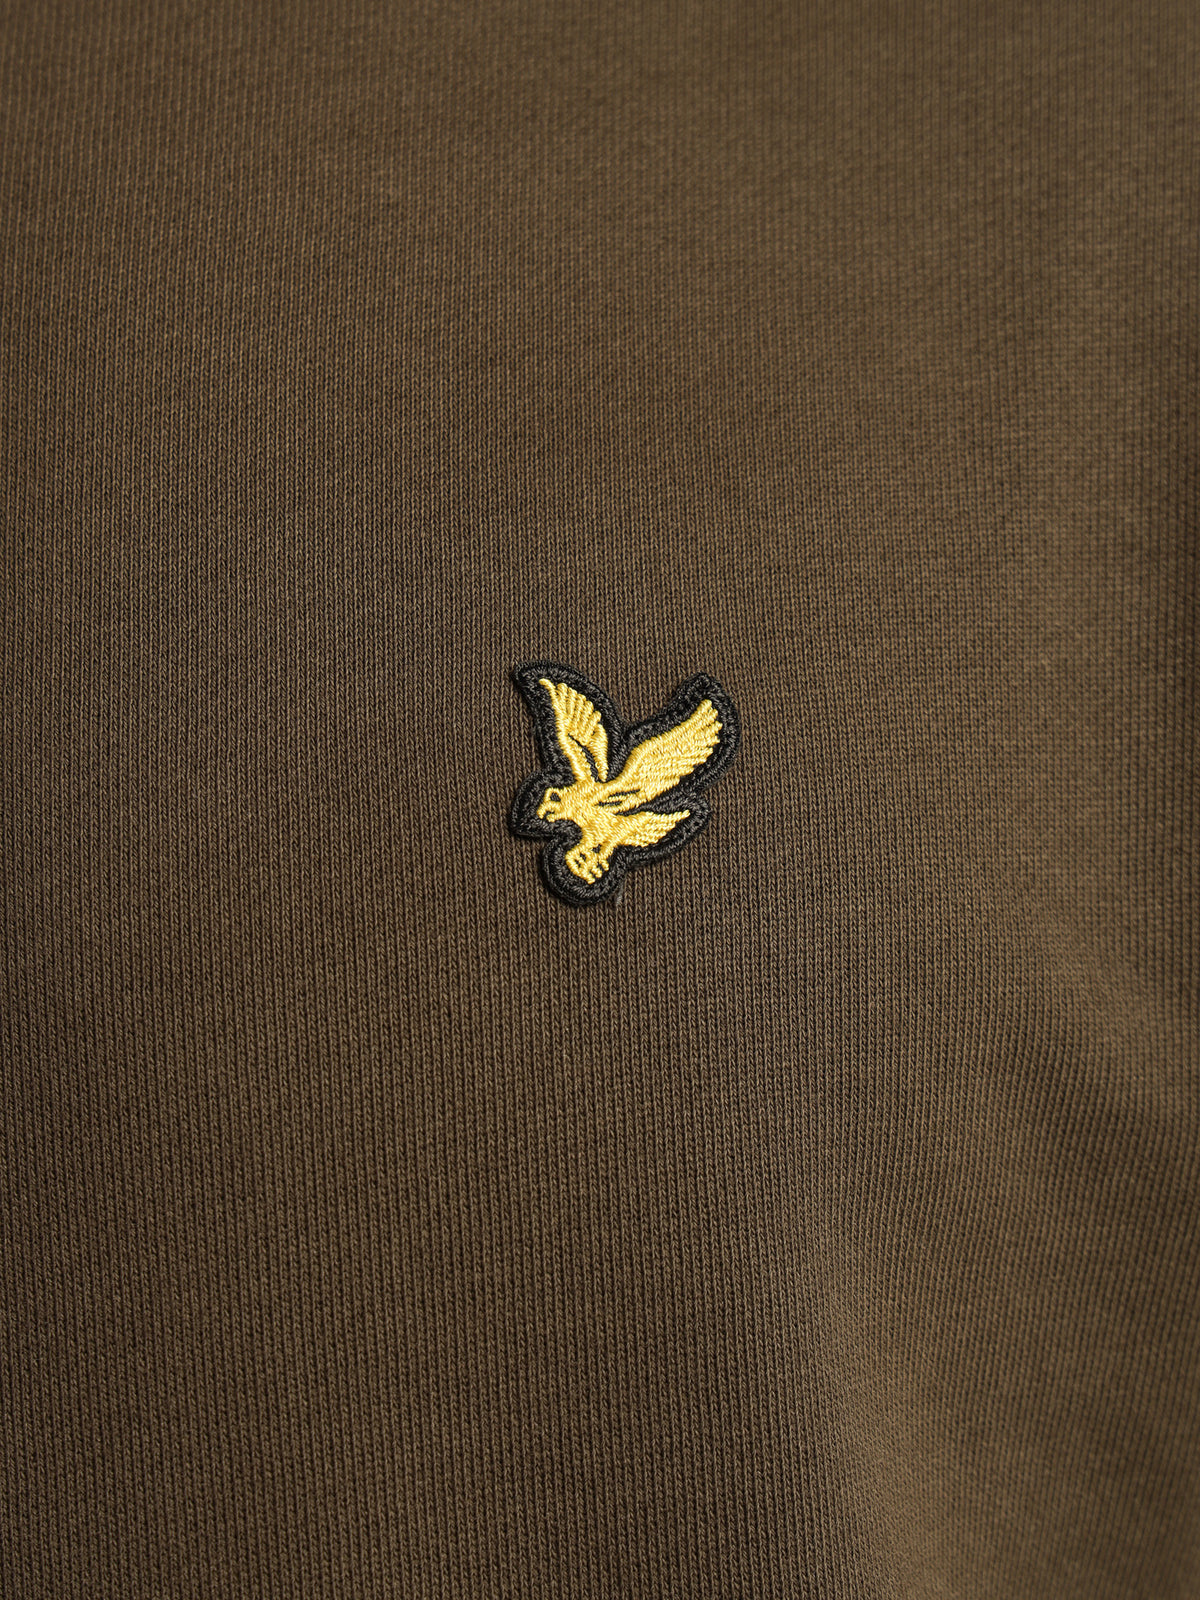 Crew Neck Sweats in Olive Green